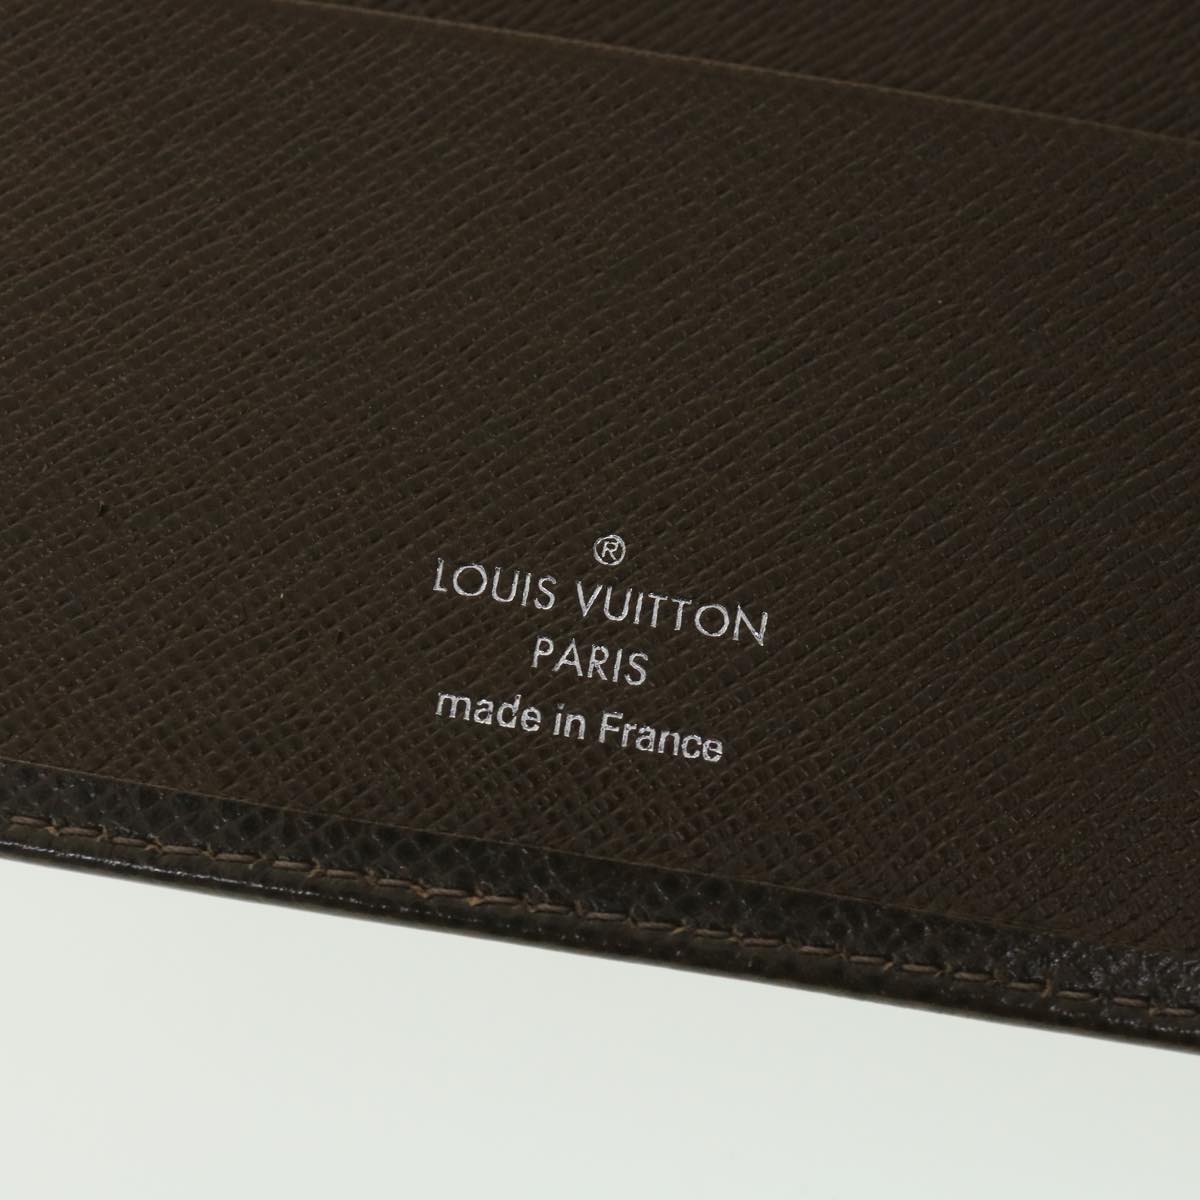 LOUIS VUITTON Taiga Agenda MM Day Planner Cover Grizzly R20426 LV Auth hk642